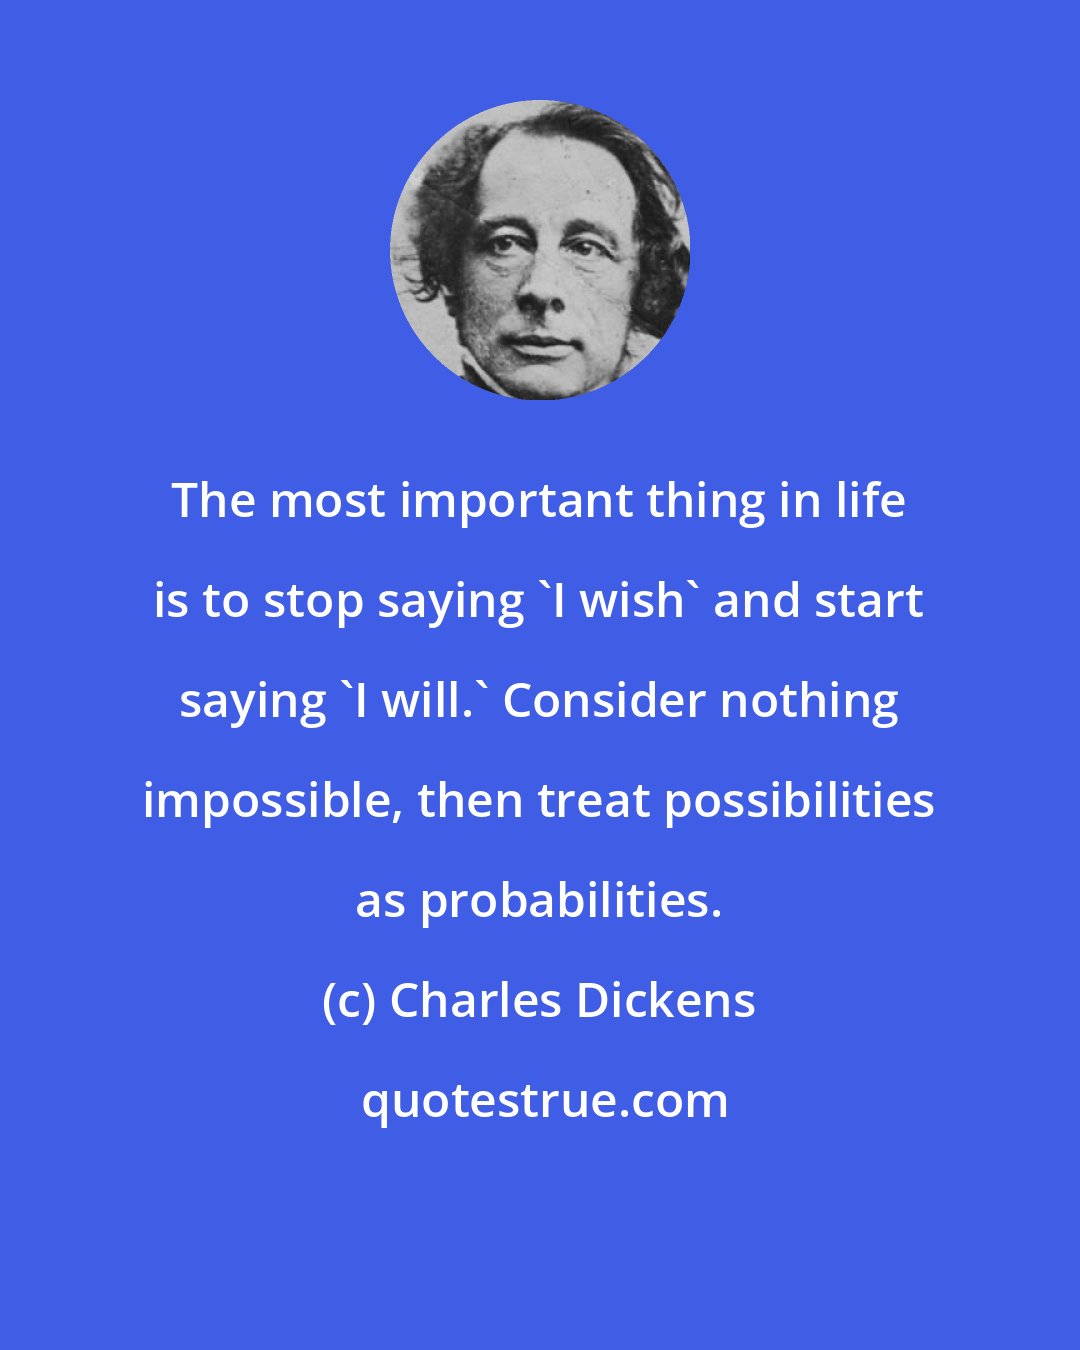 Charles Dickens: The most important thing in life is to stop saying 'I wish' and start saying 'I will.' Consider nothing impossible, then treat possibilities as probabilities.